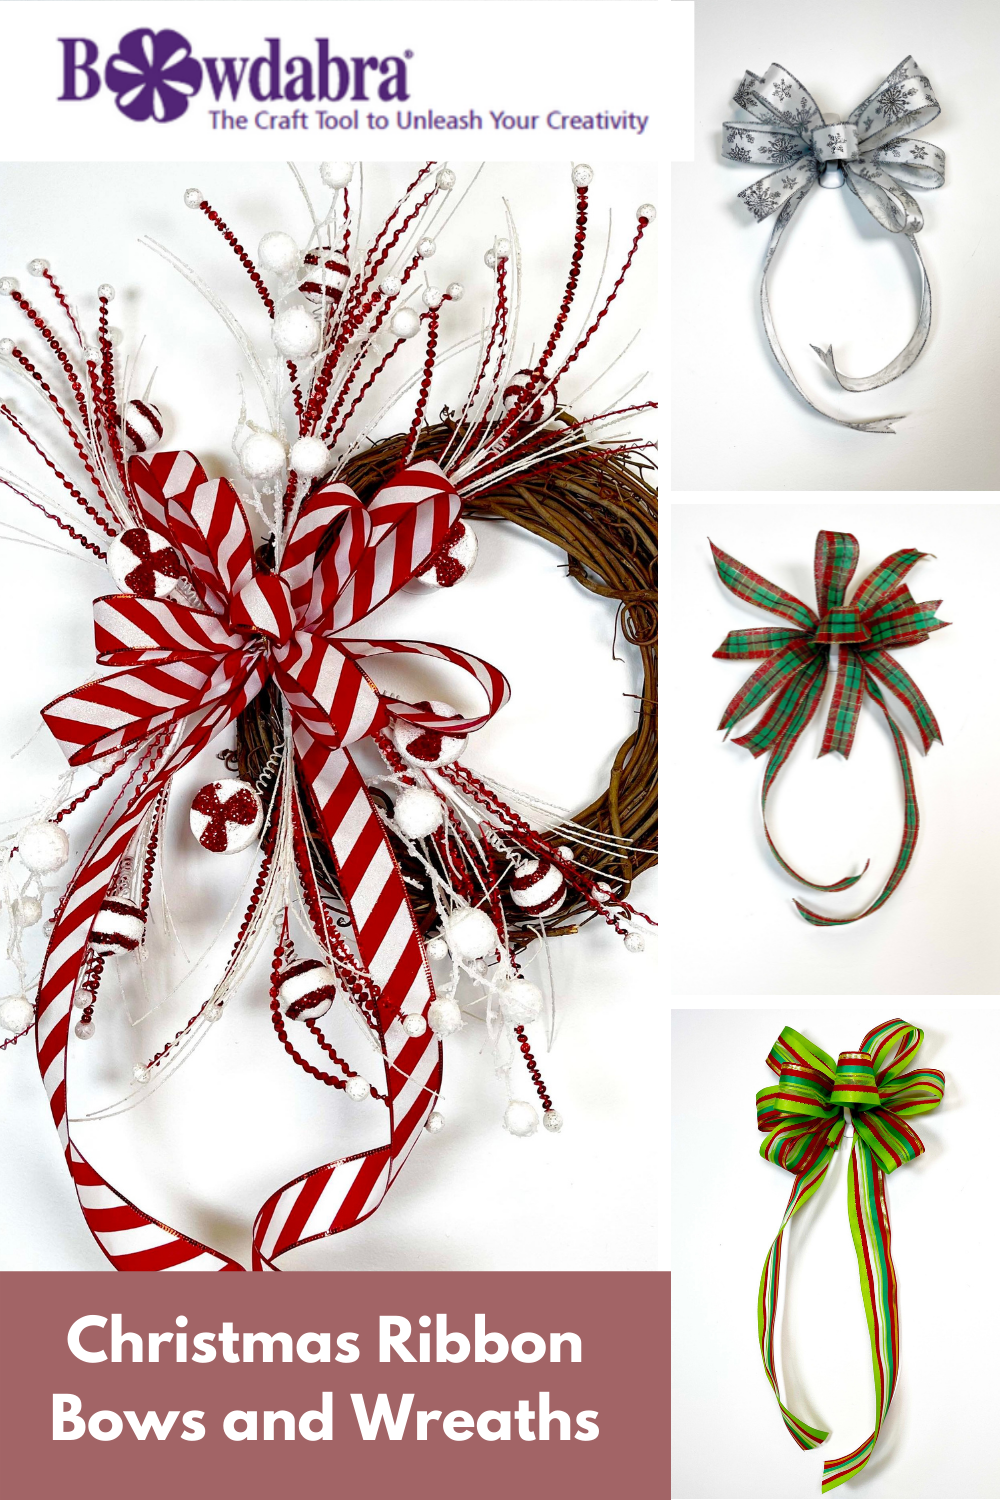 Easy to Make Wreath Bows with Bowdabra, Bowdabra